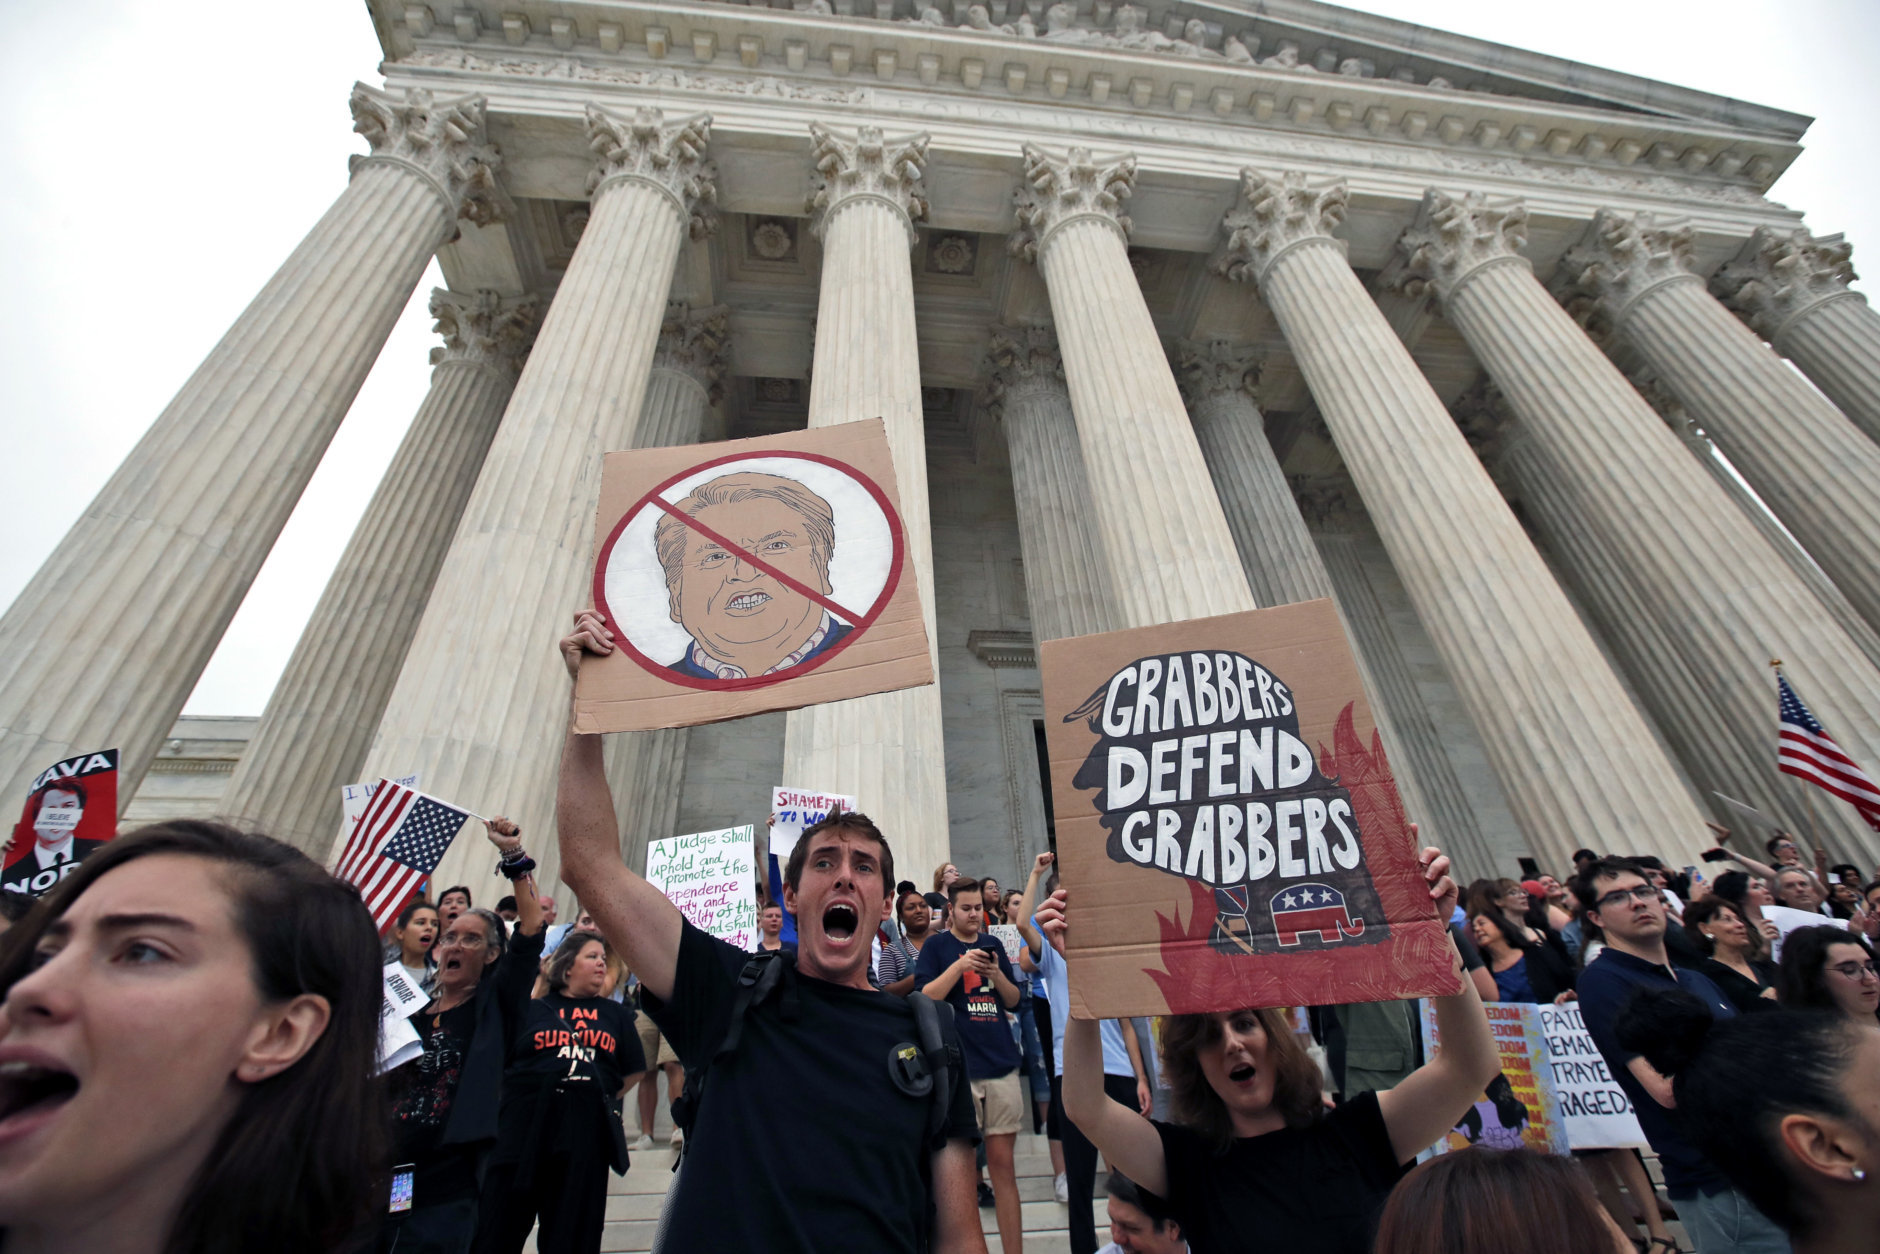 People protest on the steps of the Supreme Court after the confirmation vote of Supreme Court nominee Brett Kavanaugh, on Capitol Hill, Saturday, Oct. 6, 2018 in Washington. (AP Photo/Alex Brandon)